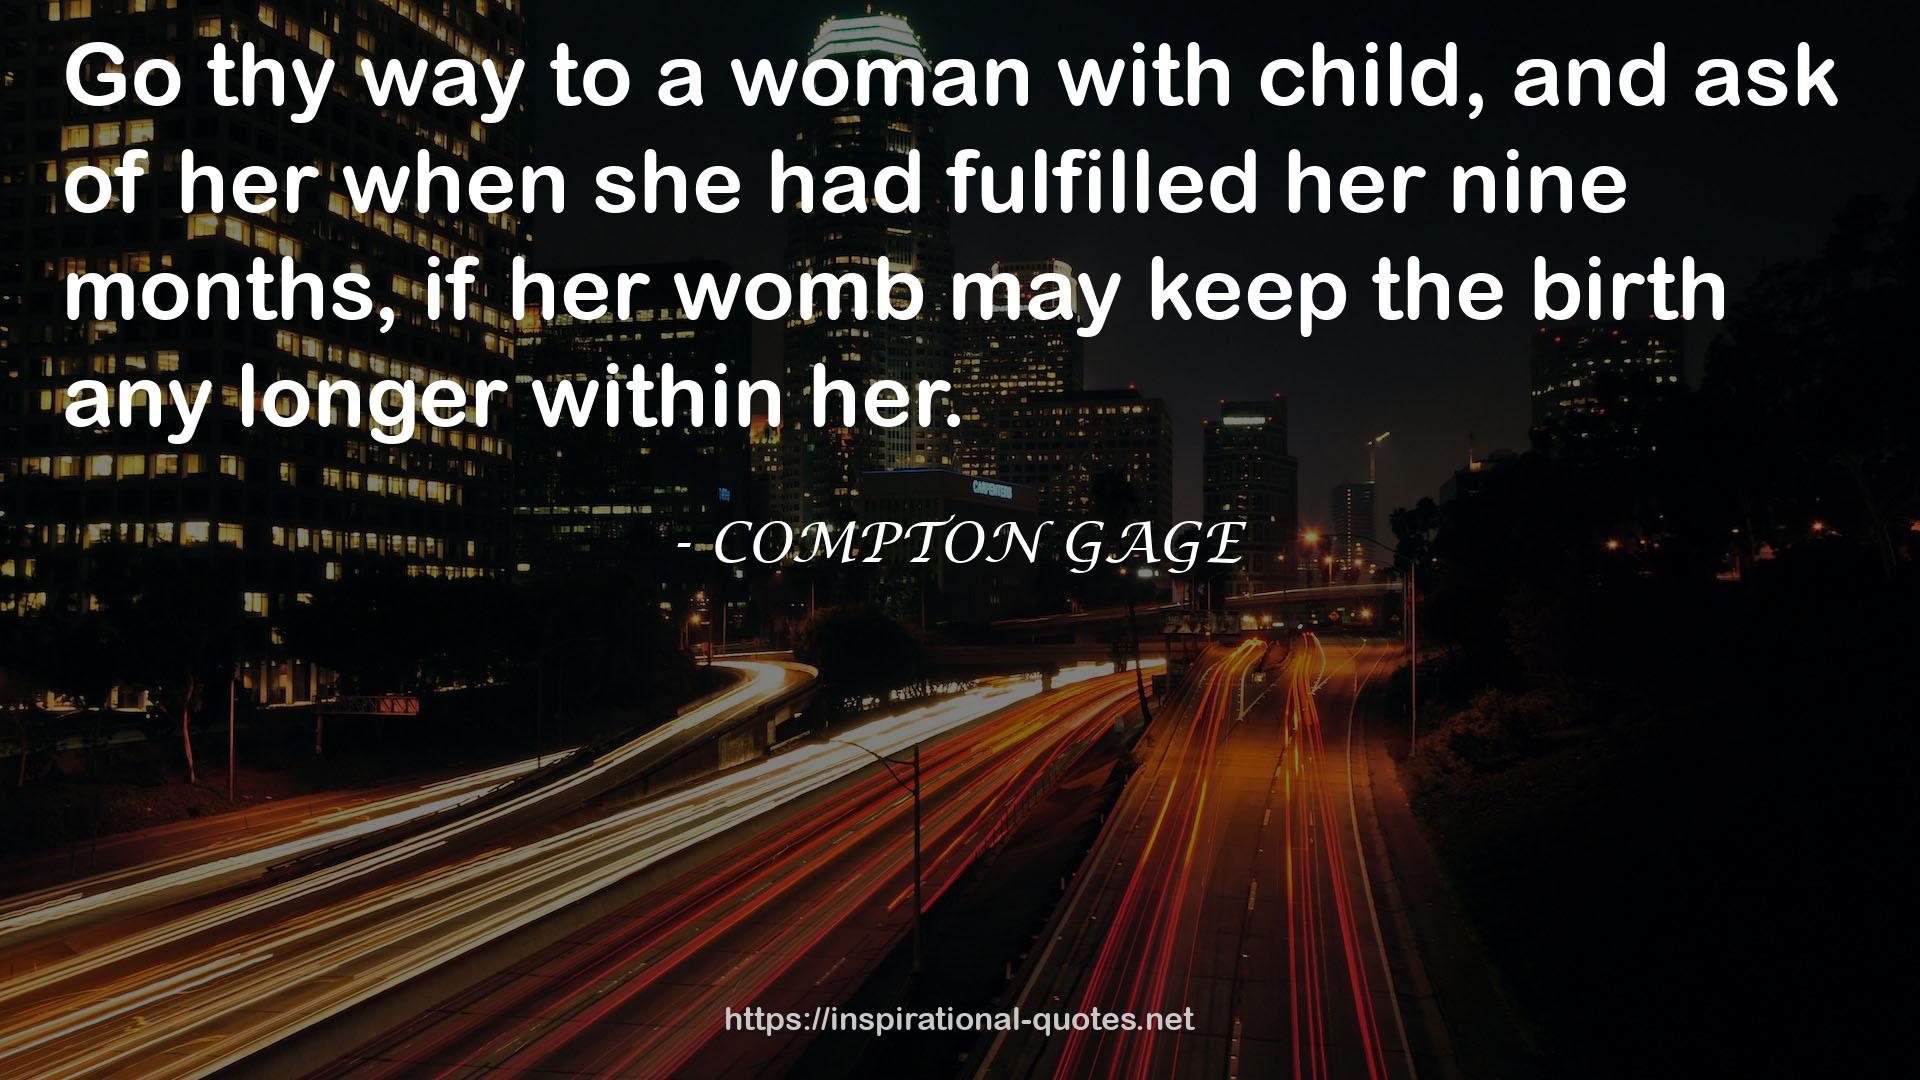 COMPTON GAGE QUOTES